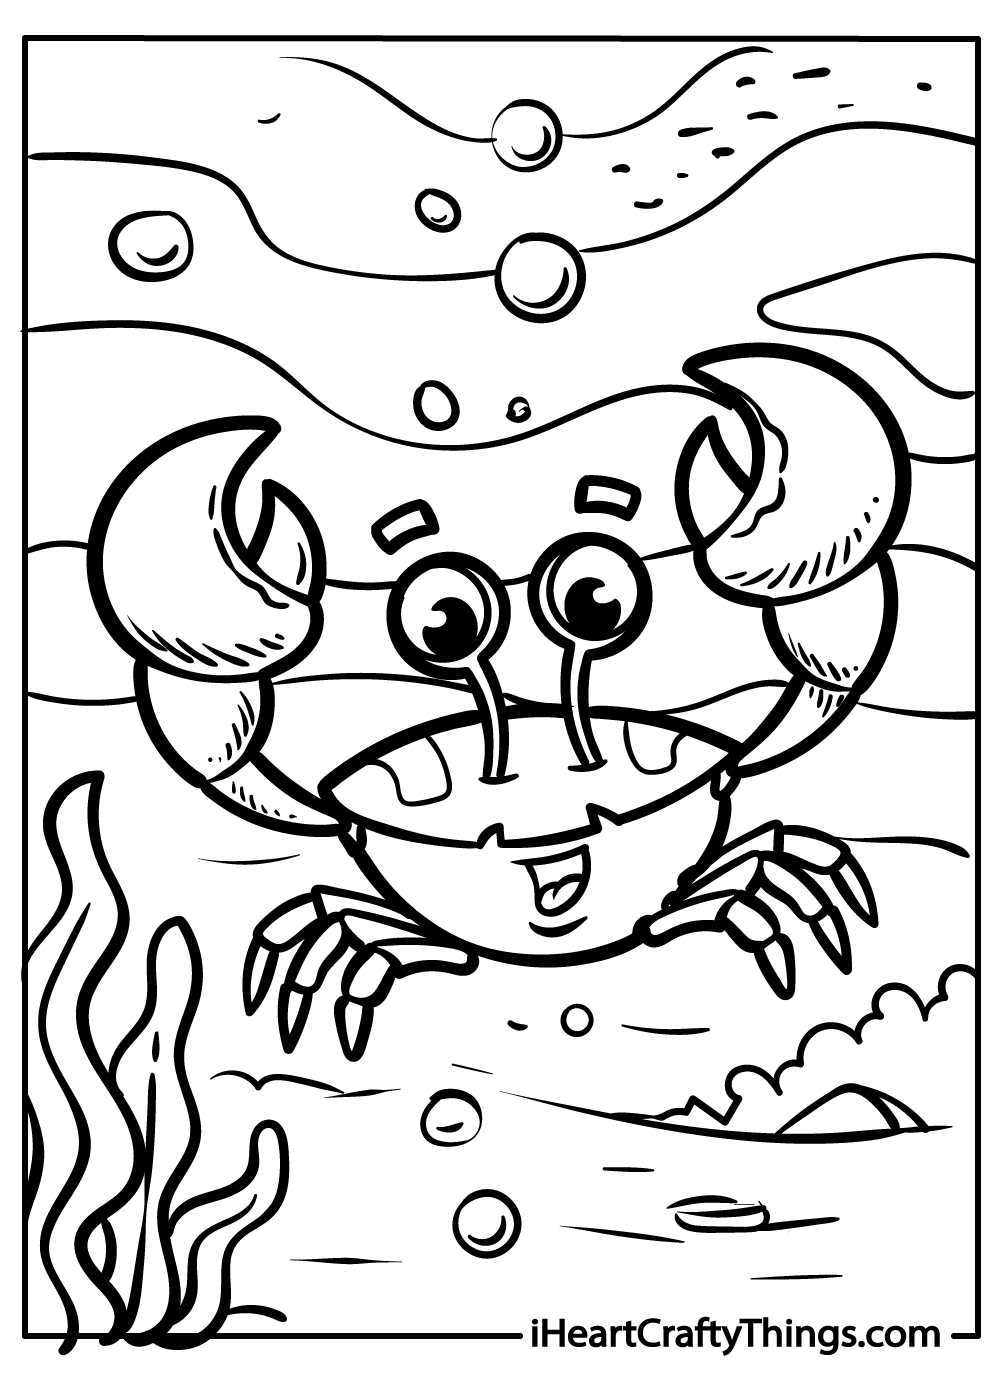 crab coloring pdf sheet for kids to color